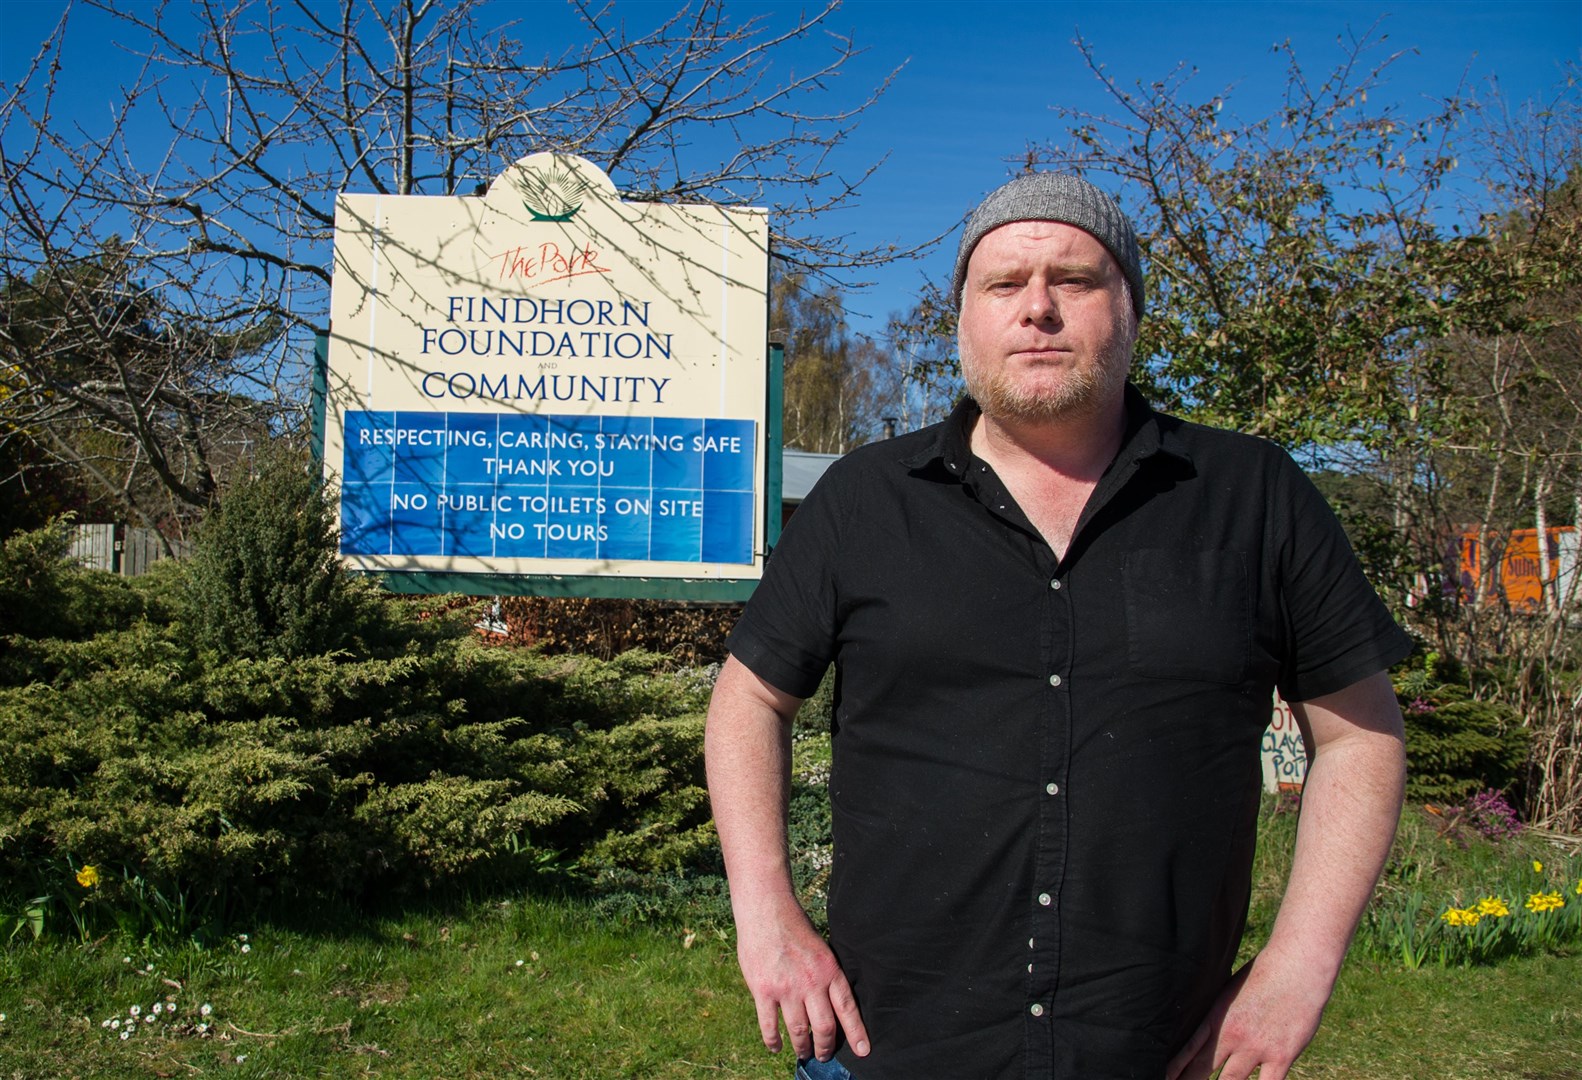 Jospeh Clark outside the Findhorn Foundation where he was made redundant and set fire to two buildings in revenge. Picture: Highland News and Media